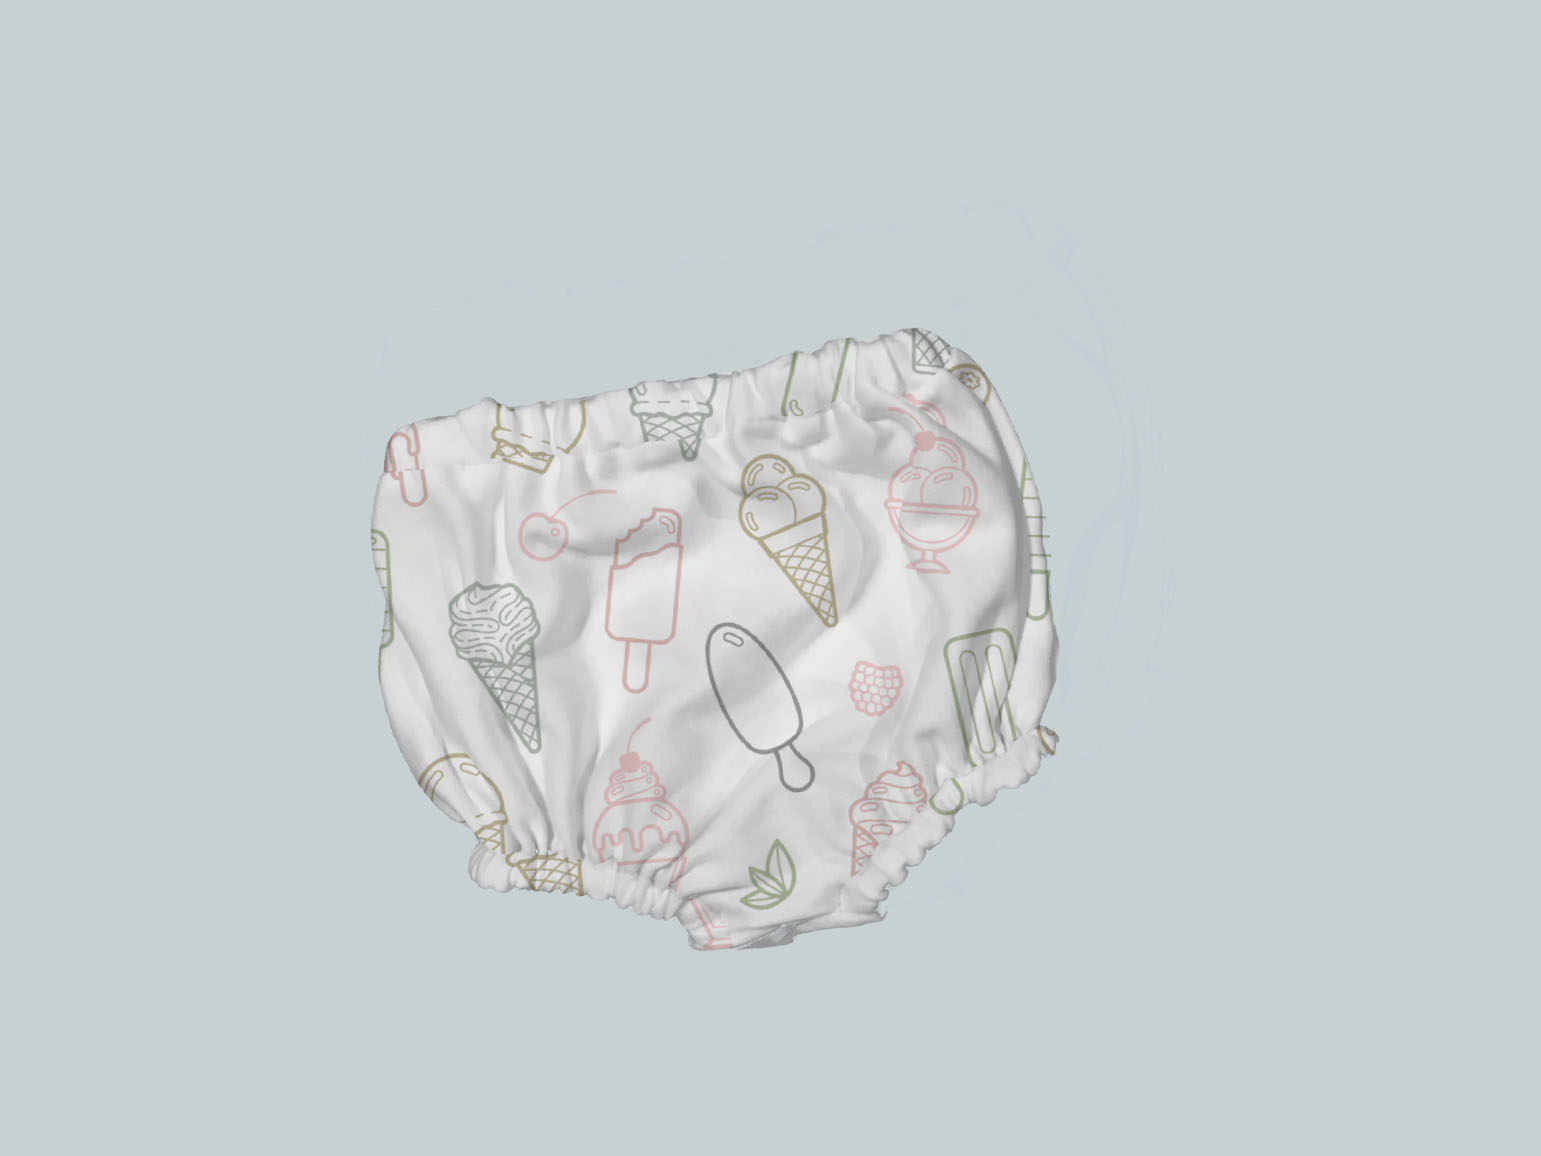 Bummies/Diaper Cover - Summer Sweets